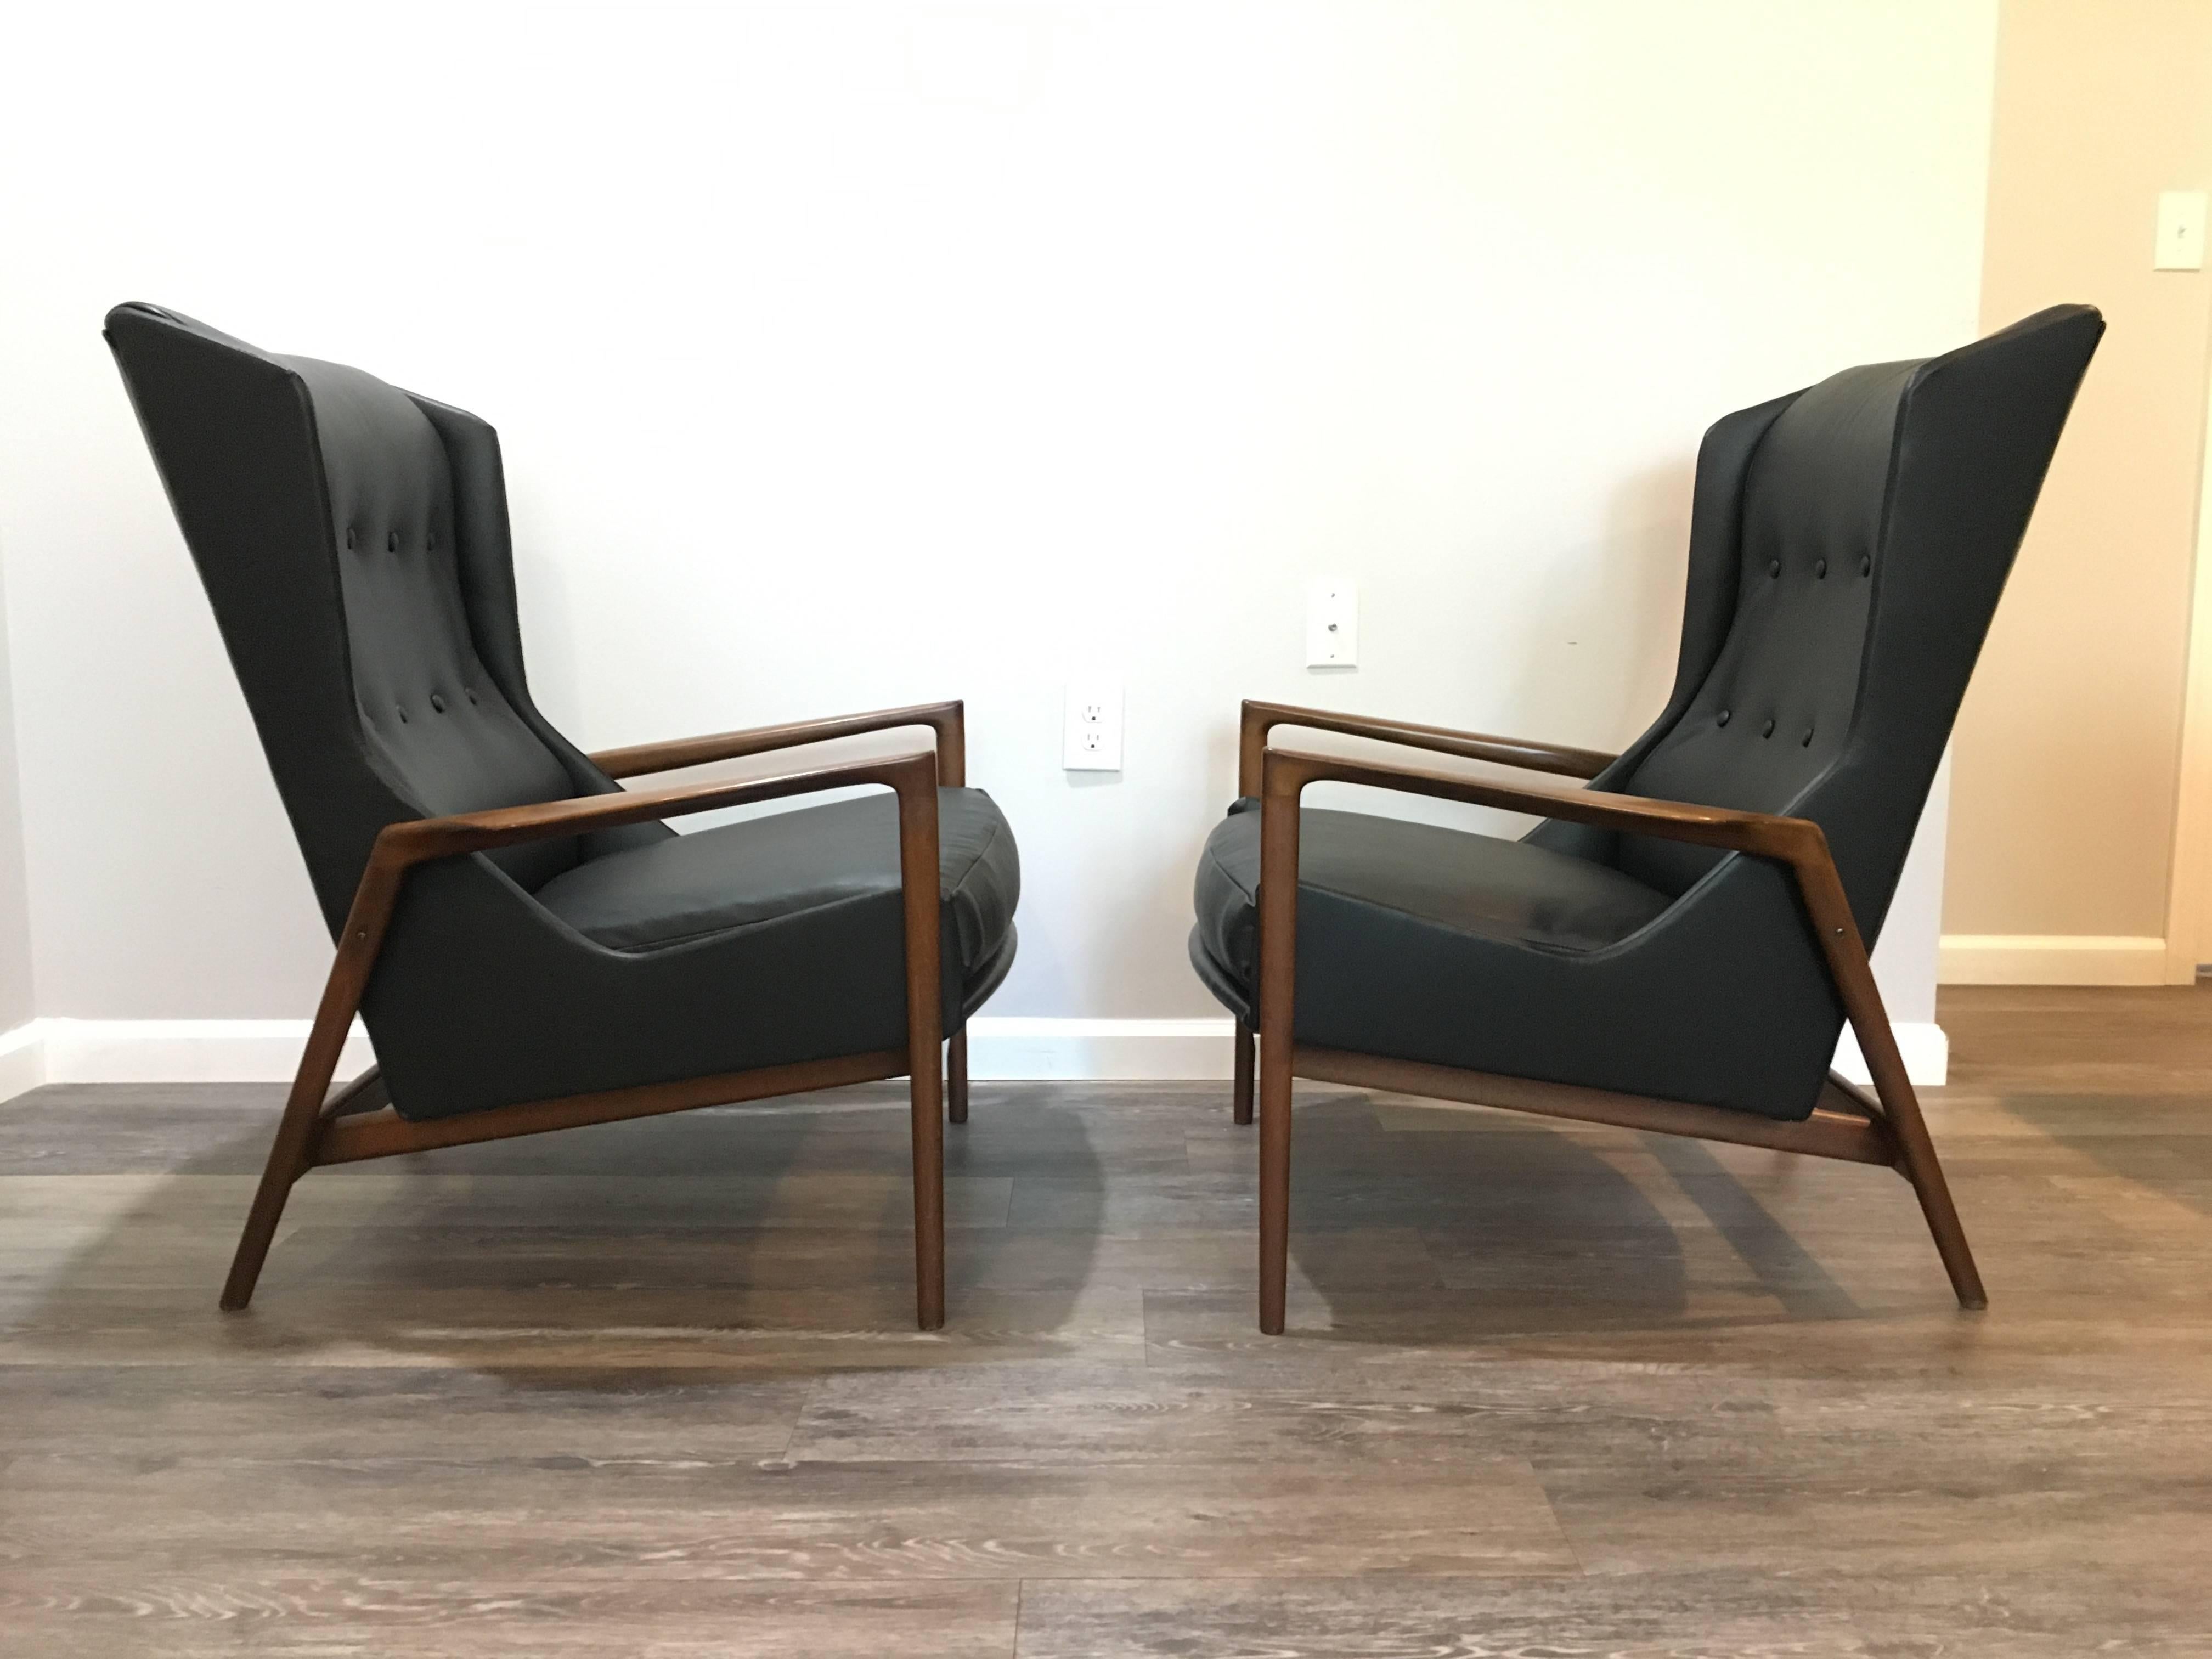 A handsome pair of IB Kofod Larsen wingback Lounge chairs done up in supple Moore & Giles leather having new strap suspension and cushioning throughout. 

Measures: Chairs 38 x 33 x 32